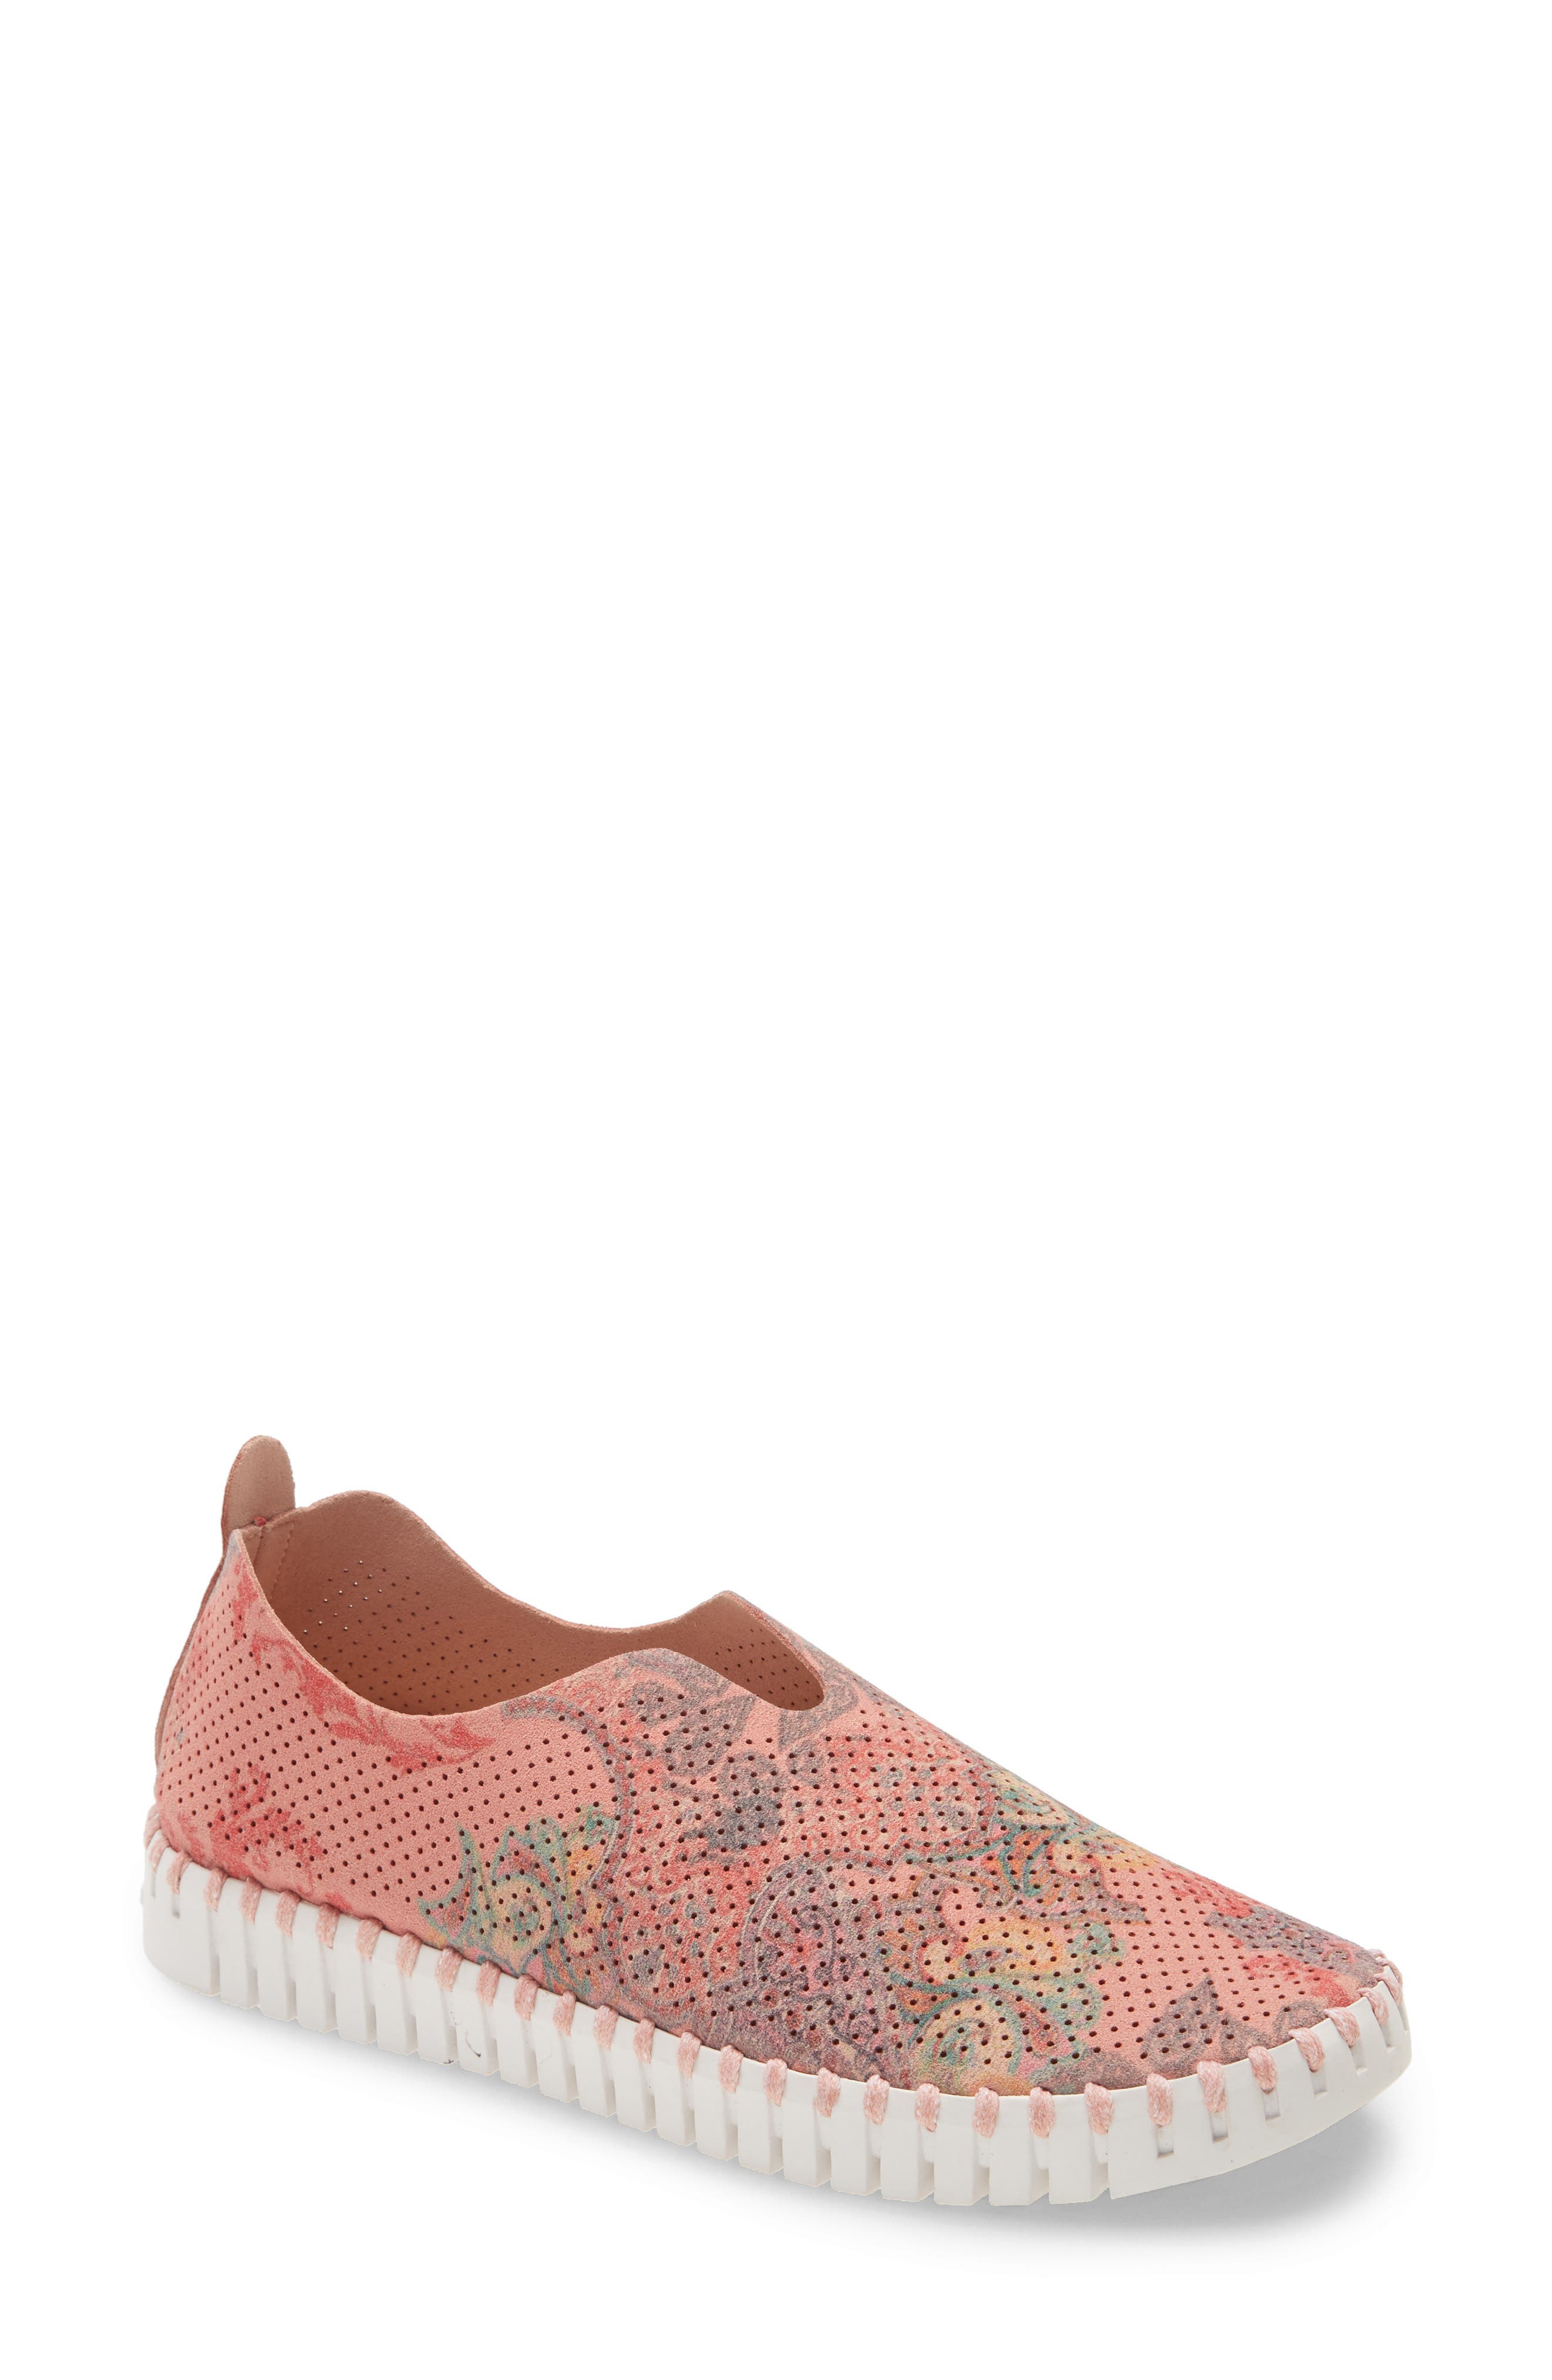 coral slip on shoes